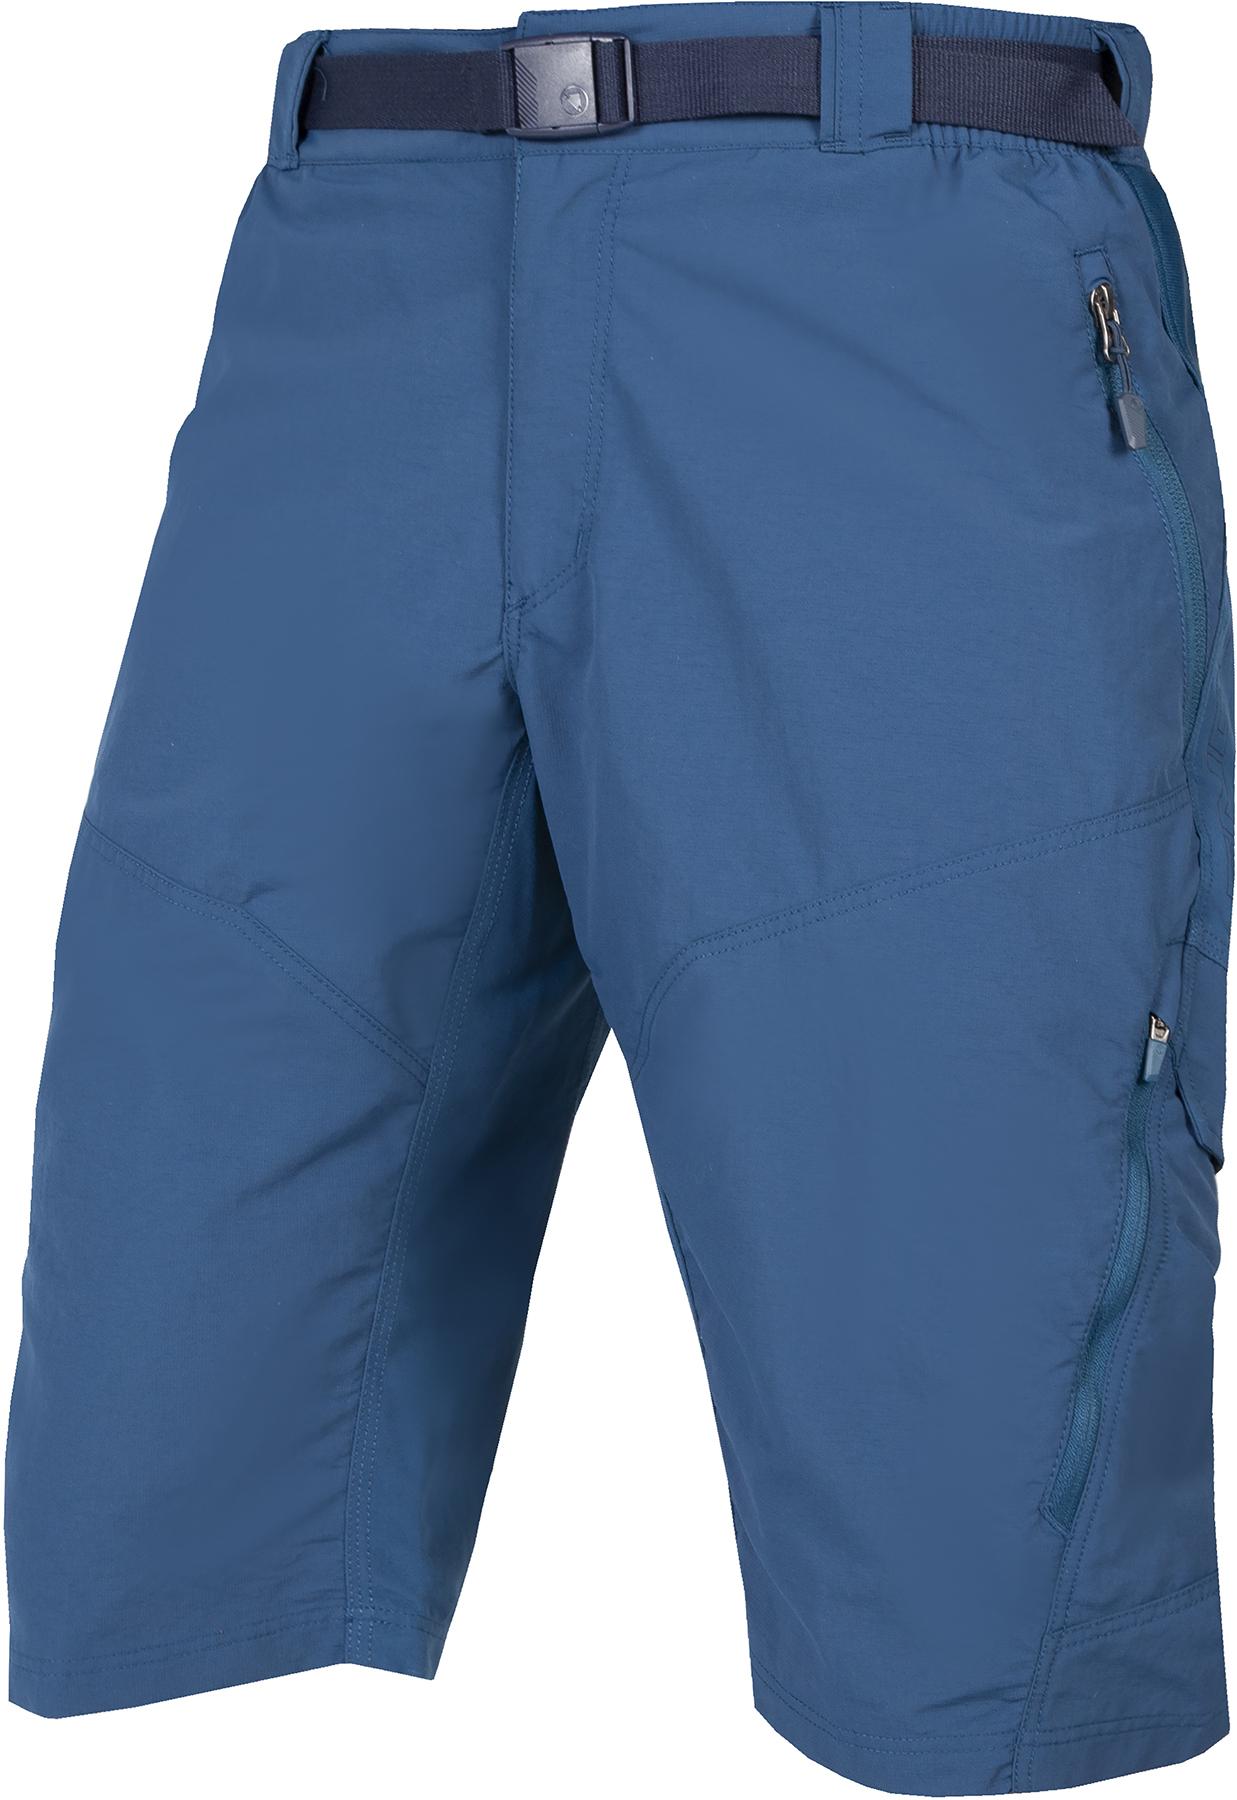 Endura Hummvee Short With Liner  Blueberry